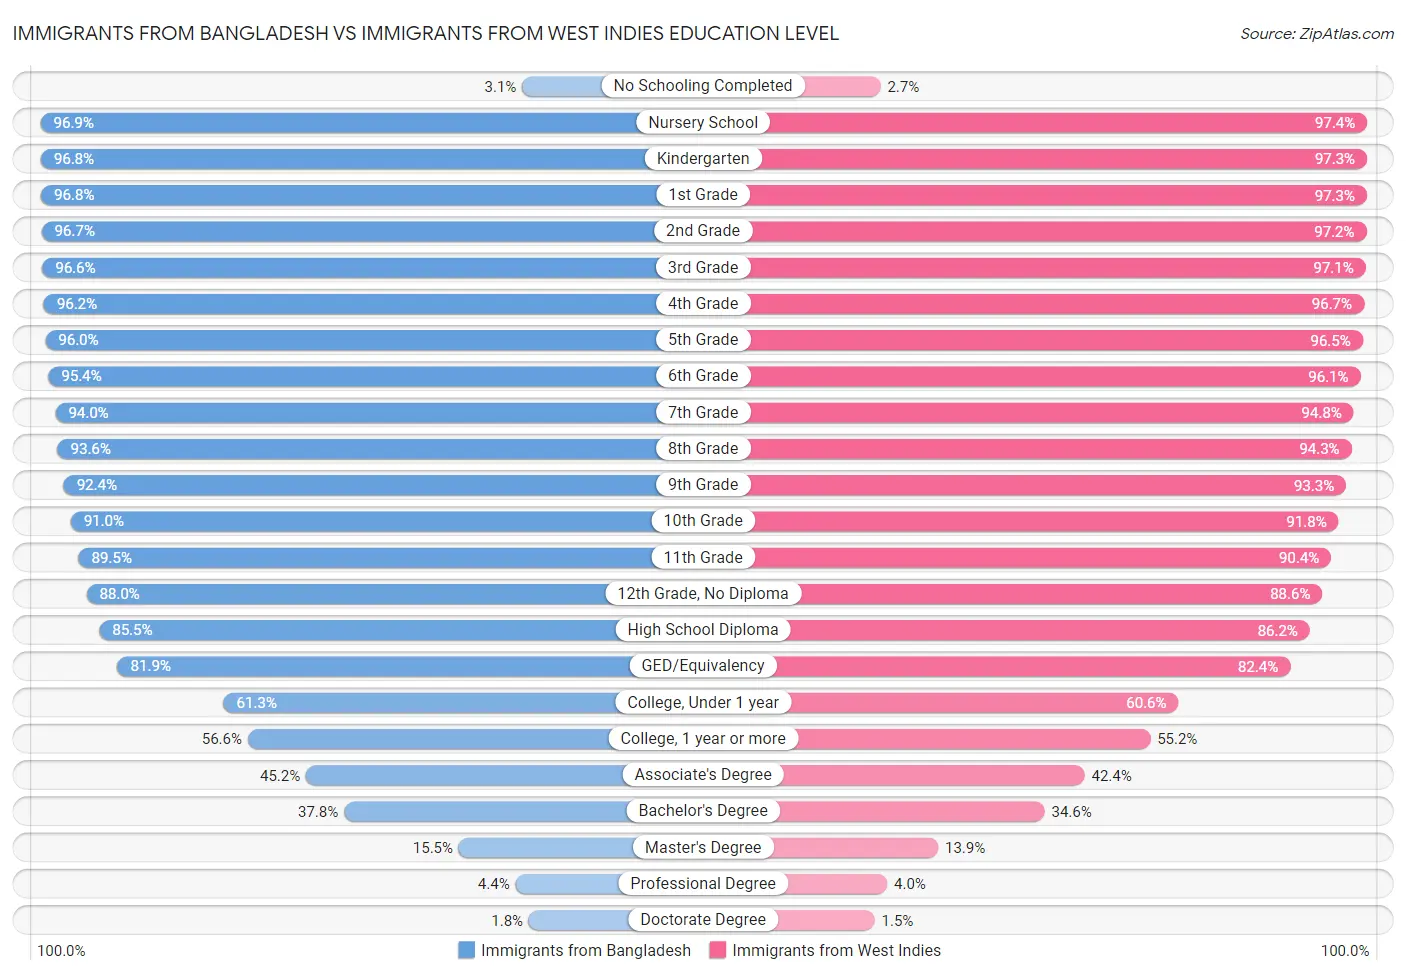 Immigrants from Bangladesh vs Immigrants from West Indies Education Level